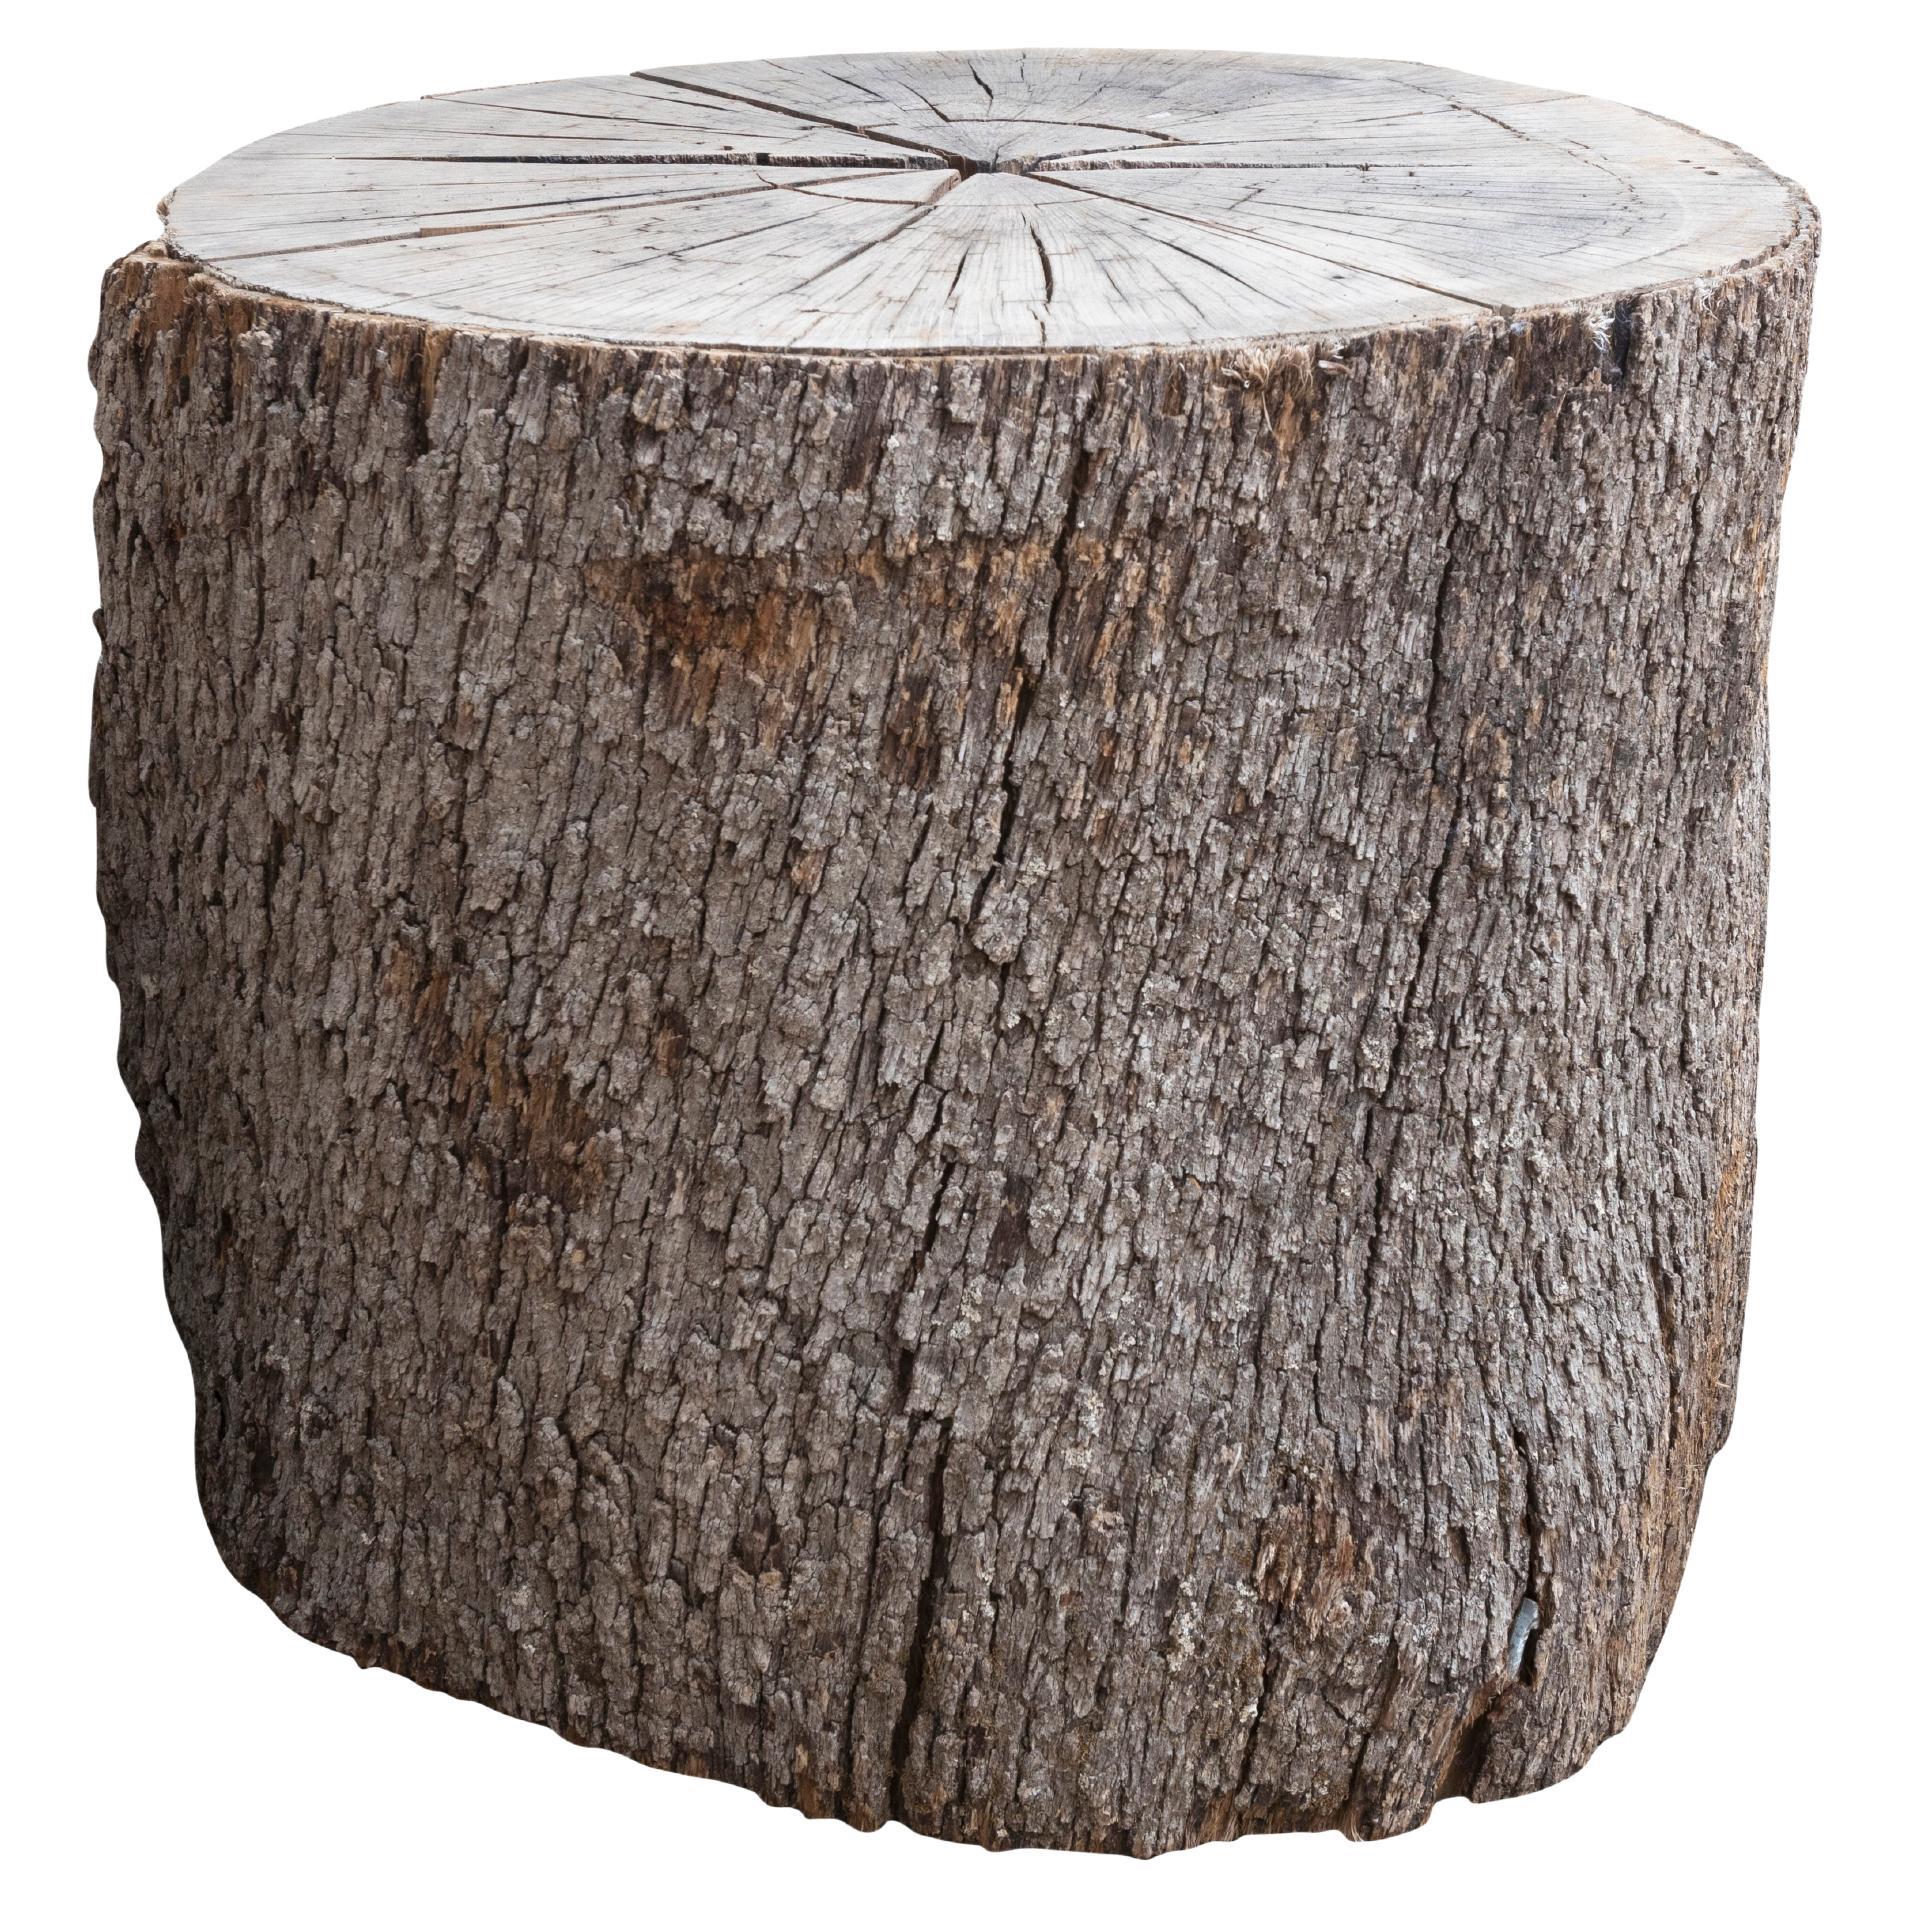 Trunk Table Base with Bark Exterior For Sale